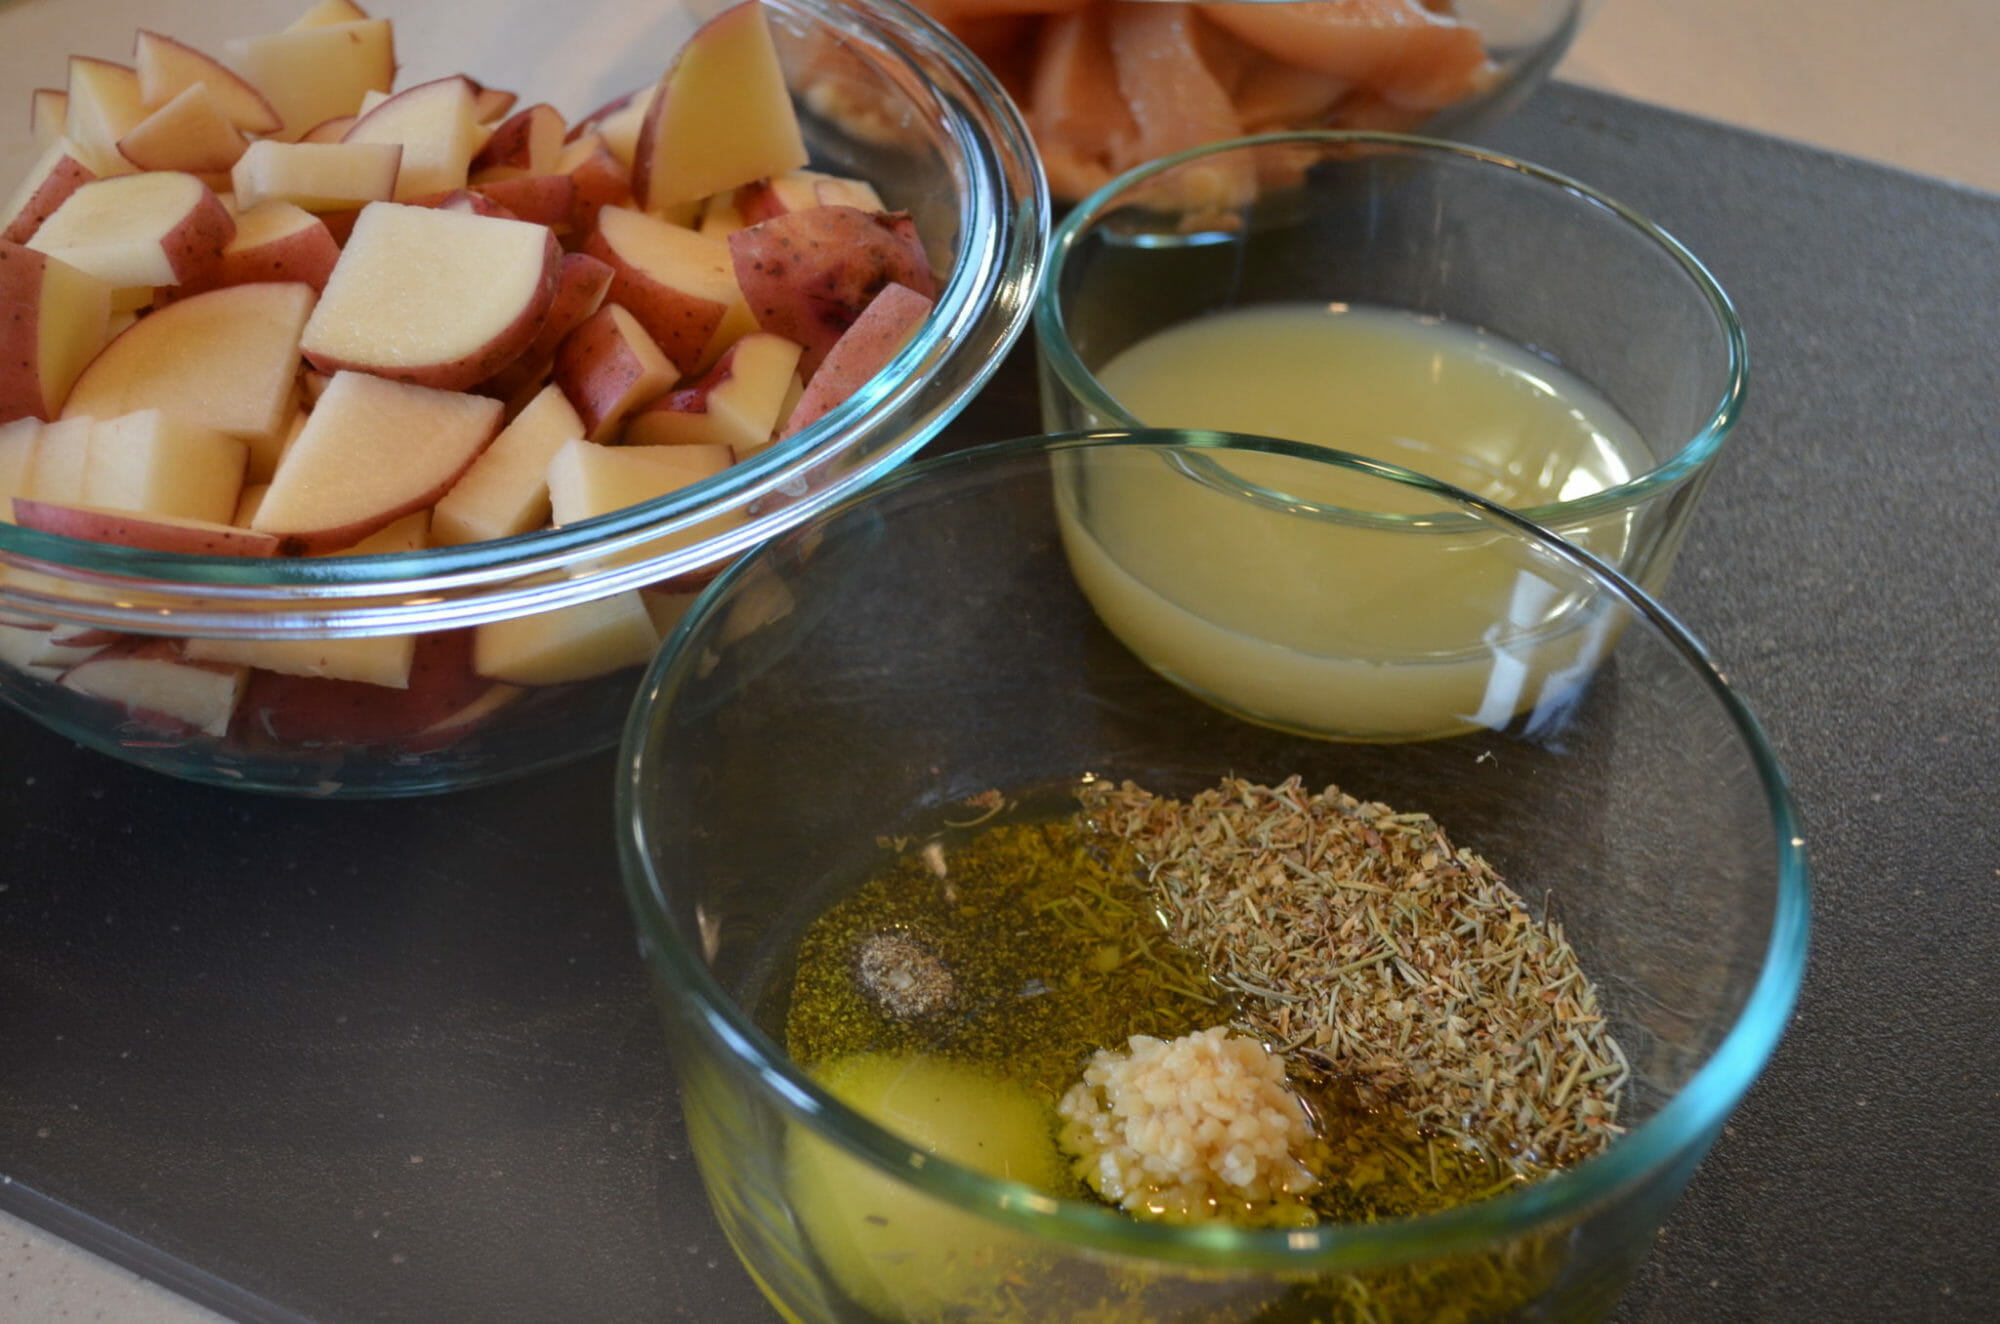 Three glass mixing bowls, one with chunks of red potato, one with lemon juice, one with herbal marinade ingredients.